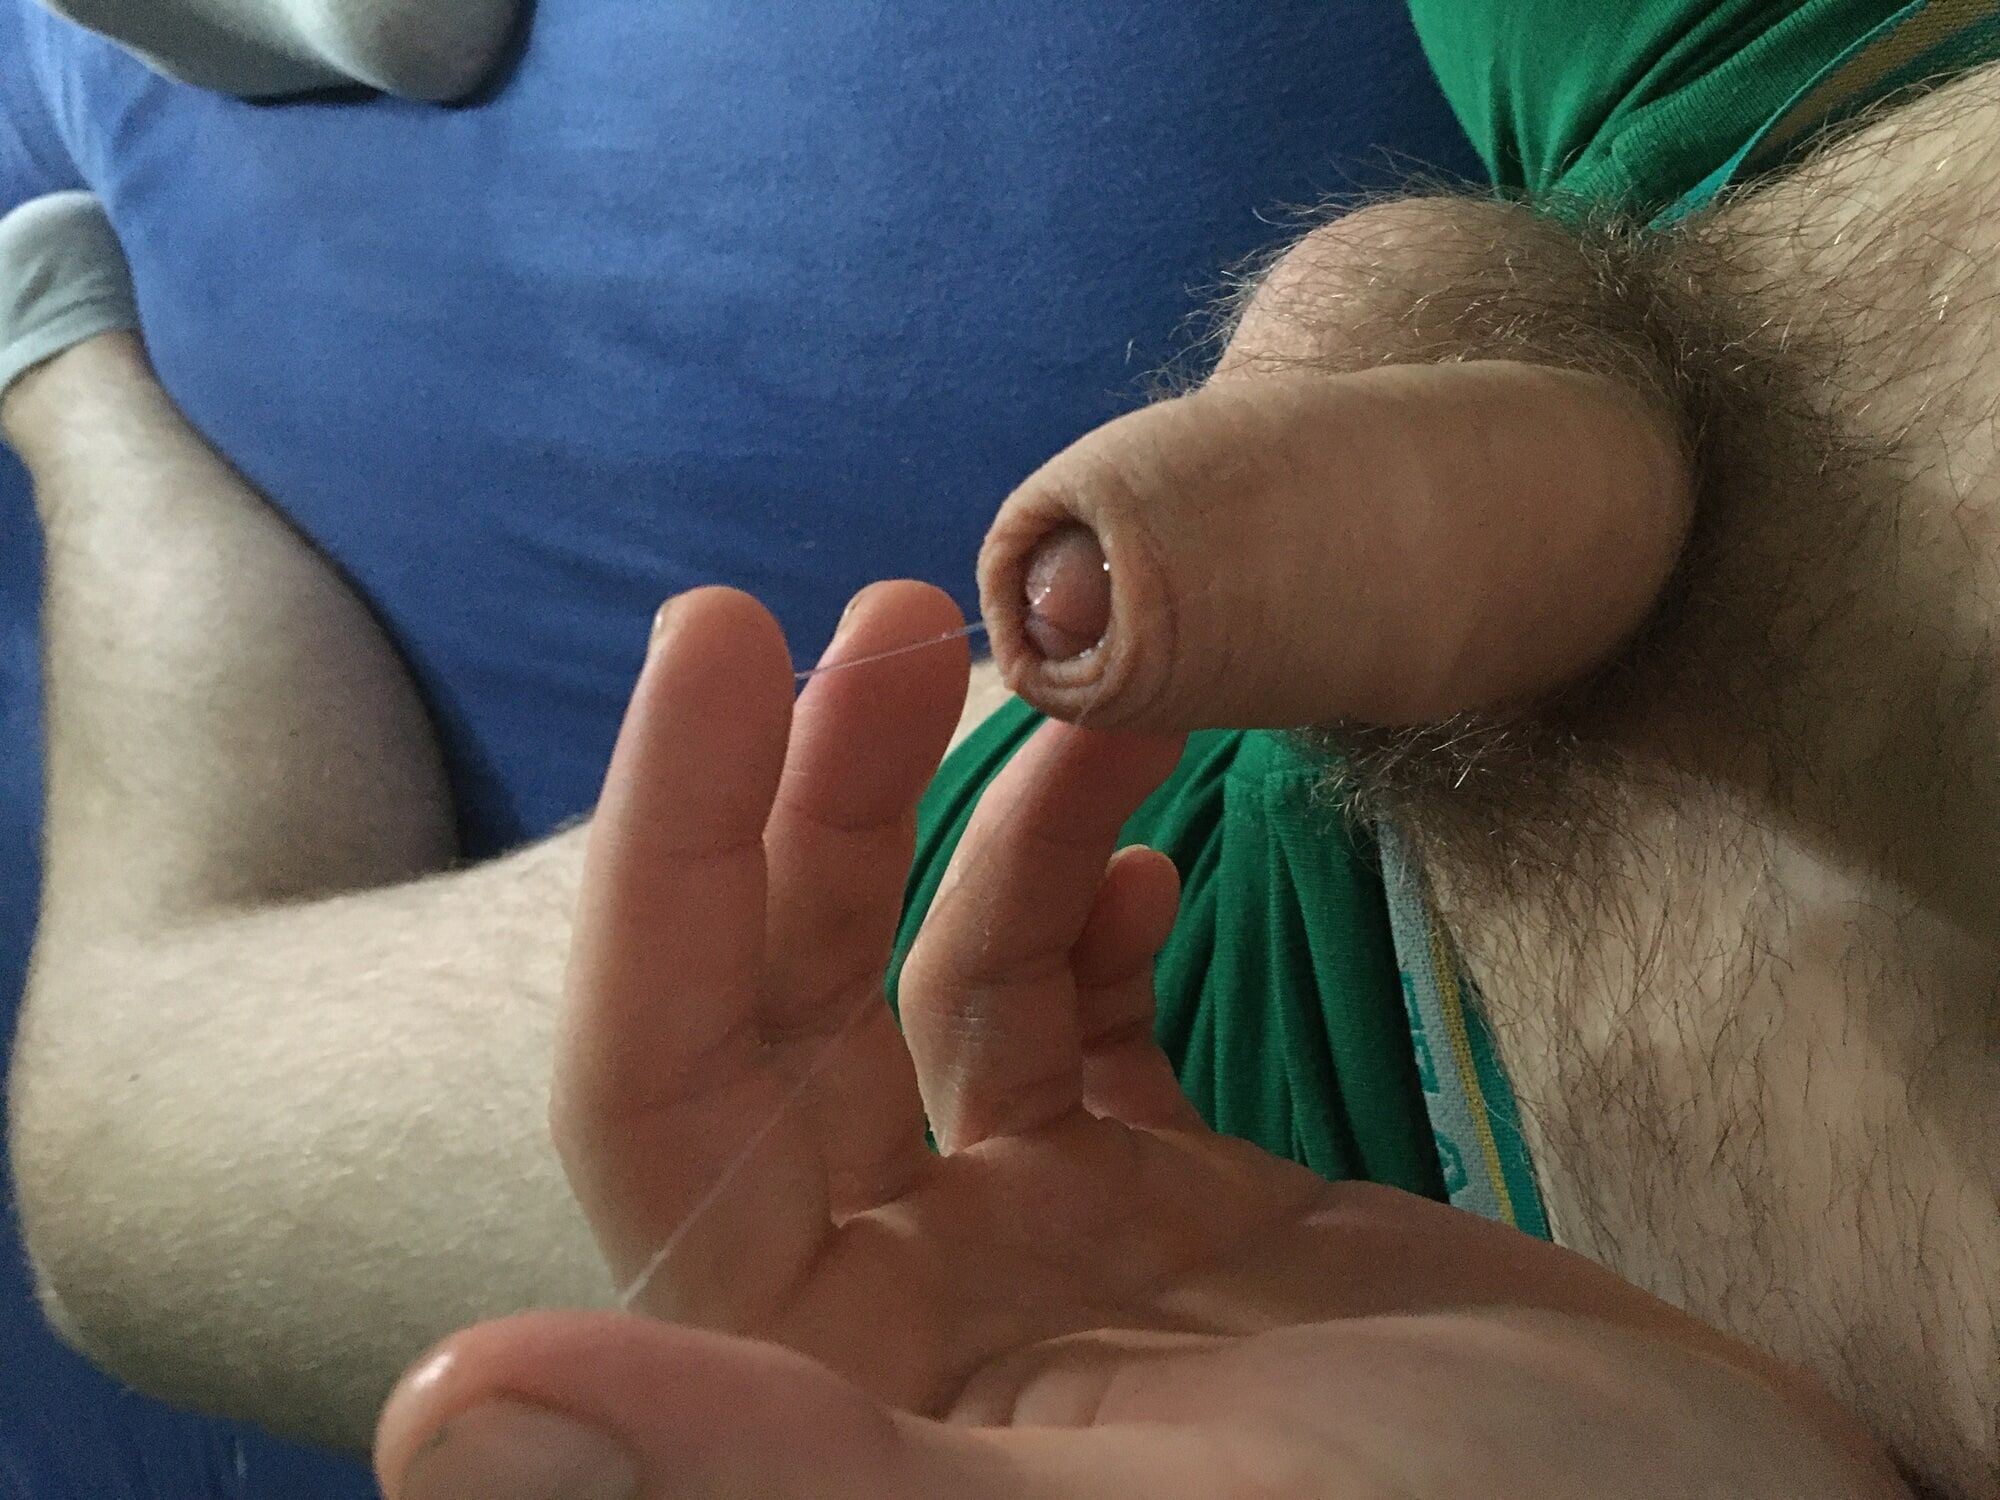 Hairy Dick And Balls Cockhead Foreskin Play With Pre- Cum #8